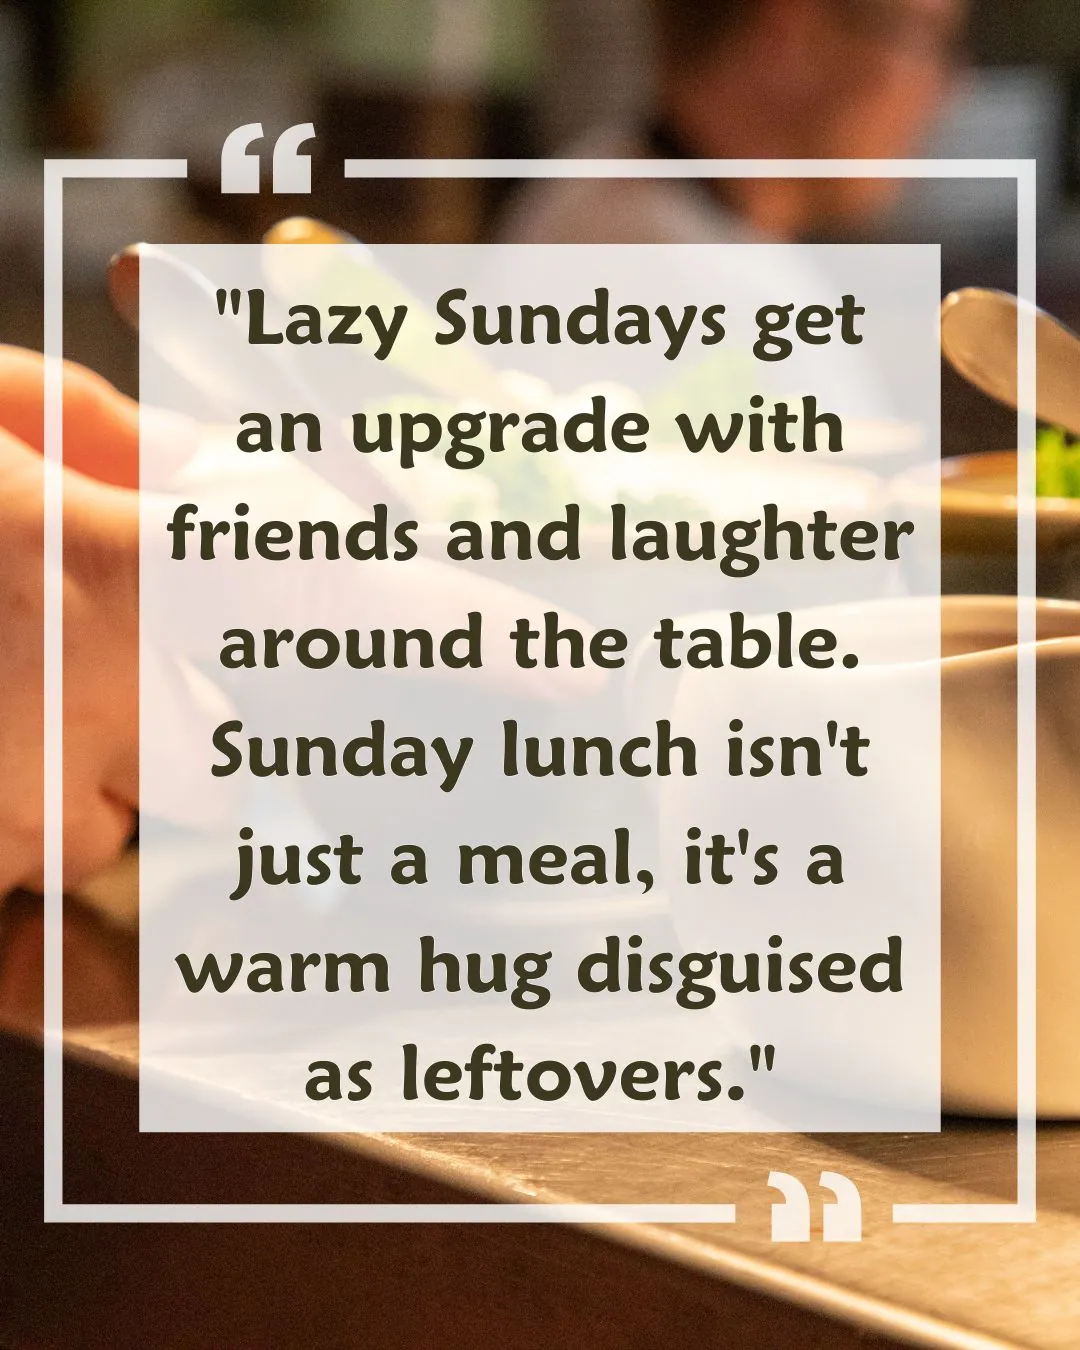 Sunday Lunch with friends quote with Image 3